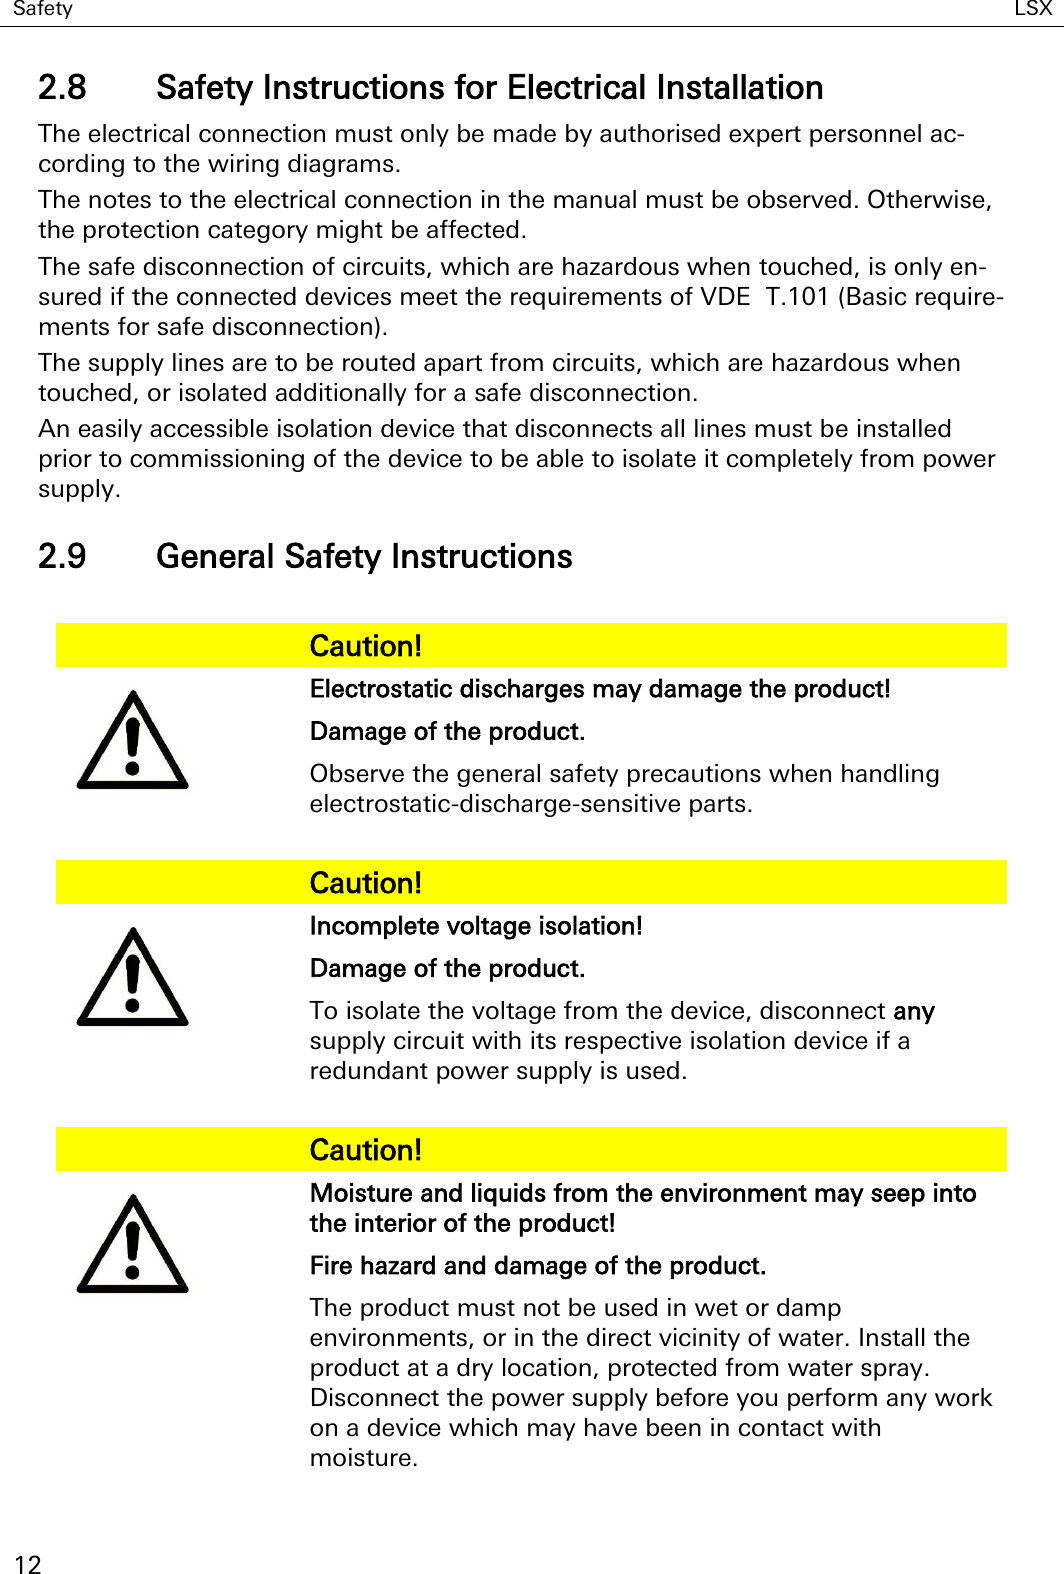 Safety LSX   12 2.8 Safety Instructions for Electrical Installation The electrical connection must only be made by authorised expert personnel ac-cording to the wiring diagrams. The notes to the electrical connection in the manual must be observed. Otherwise, the protection category might be affected. The safe disconnection of circuits, which are hazardous when touched, is only en-sured if the connected devices meet the requirements of VDE  T.101 (Basic require-ments for safe disconnection). The supply lines are to be routed apart from circuits, which are hazardous when touched, or isolated additionally for a safe disconnection. An easily accessible isolation device that disconnects all lines must be installed prior to commissioning of the device to be able to isolate it completely from power supply. 2.9 General Safety Instructions    Caution!  Electrostatic discharges may damage the product! Damage of the product. Observe the general safety precautions when handling electrostatic-discharge-sensitive parts.    Caution!  Incomplete voltage isolation! Damage of the product. To isolate the voltage from the device, disconnect any supply circuit with its respective isolation device if a redundant power supply is used.    Caution!  Moisture and liquids from the environment may seep into the interior of the product! Fire hazard and damage of the product. The product must not be used in wet or damp environments, or in the direct vicinity of water. Install the product at a dry location, protected from water spray. Disconnect the power supply before you perform any work on a device which may have been in contact with moisture.  